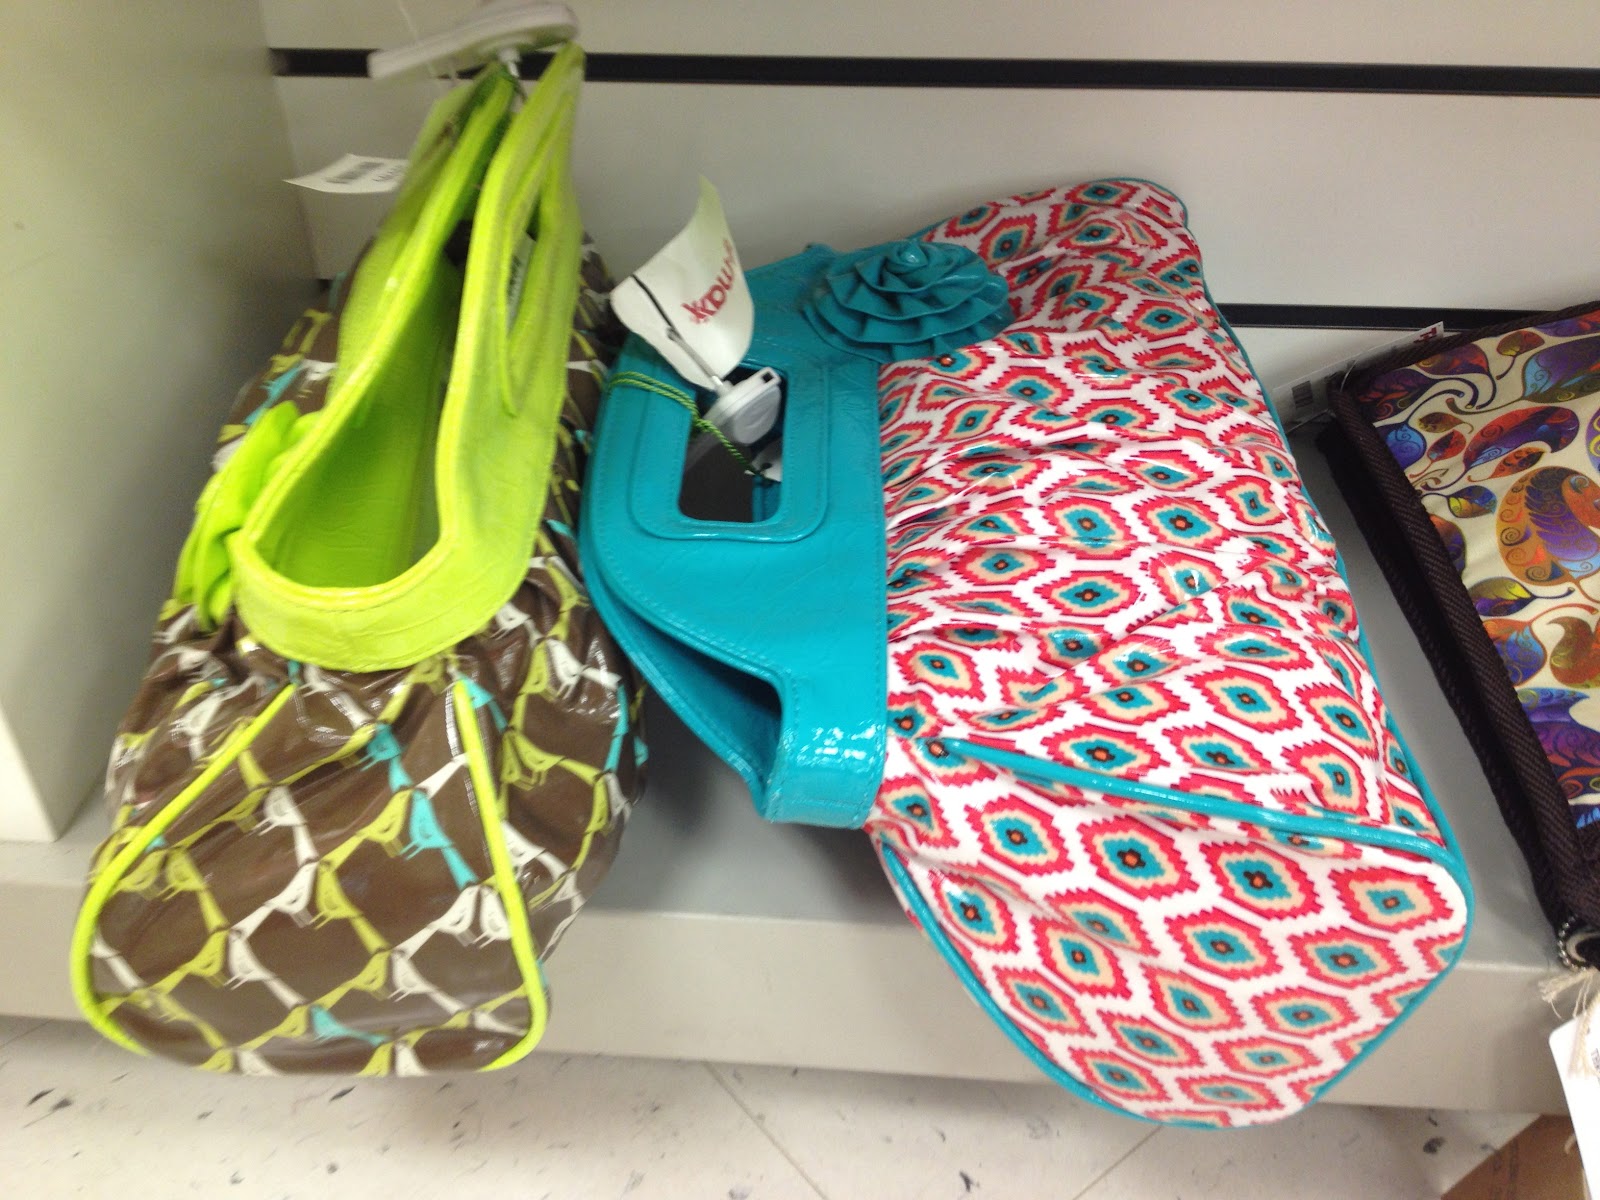 ... check out the purses next time you are at TJ Maxx (and Marshalls too